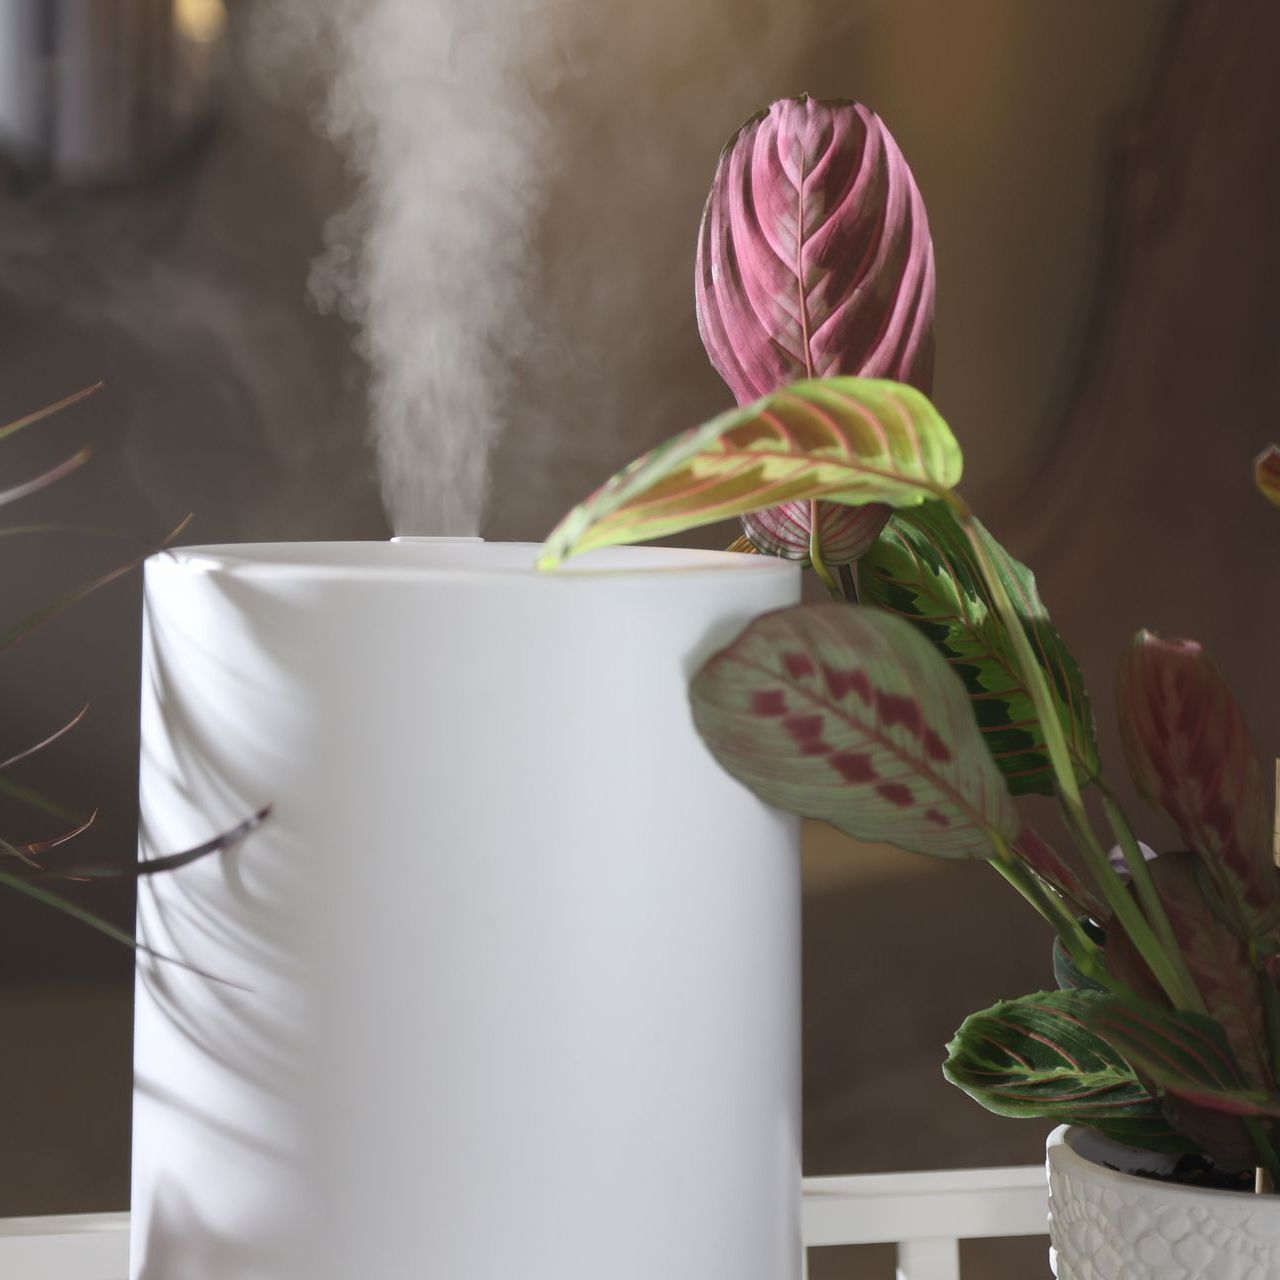 a humidifier is sitting on a table next to a potted plant .